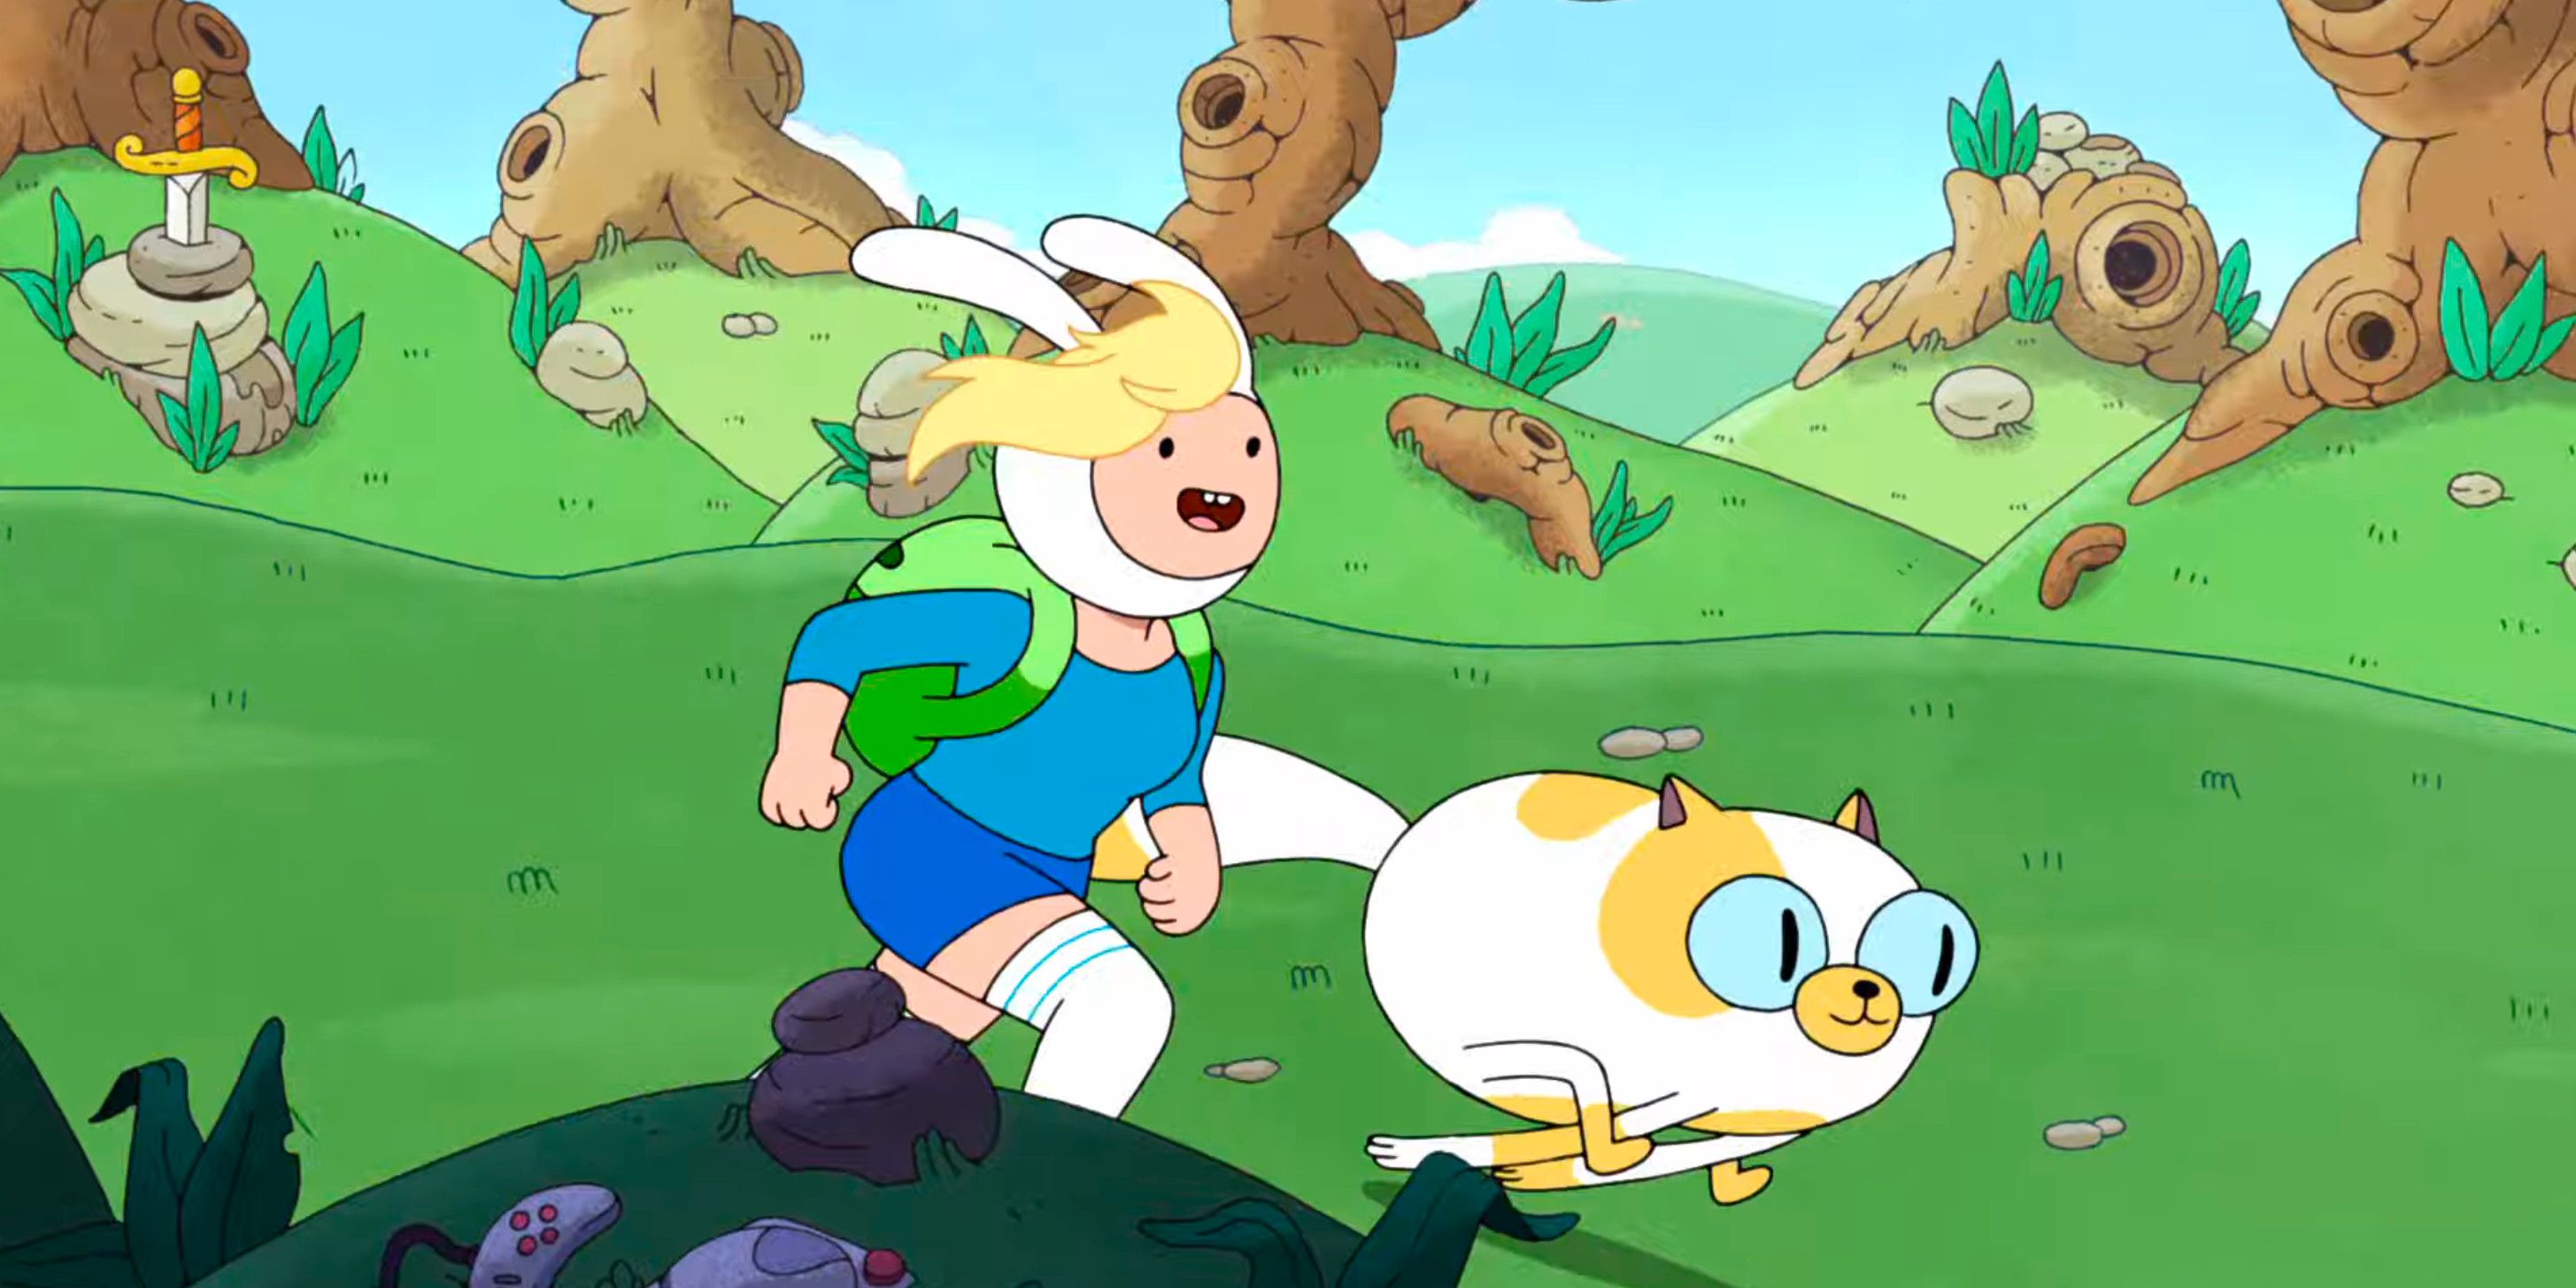 Fionna and Cake in their Adventure Time spinoff.